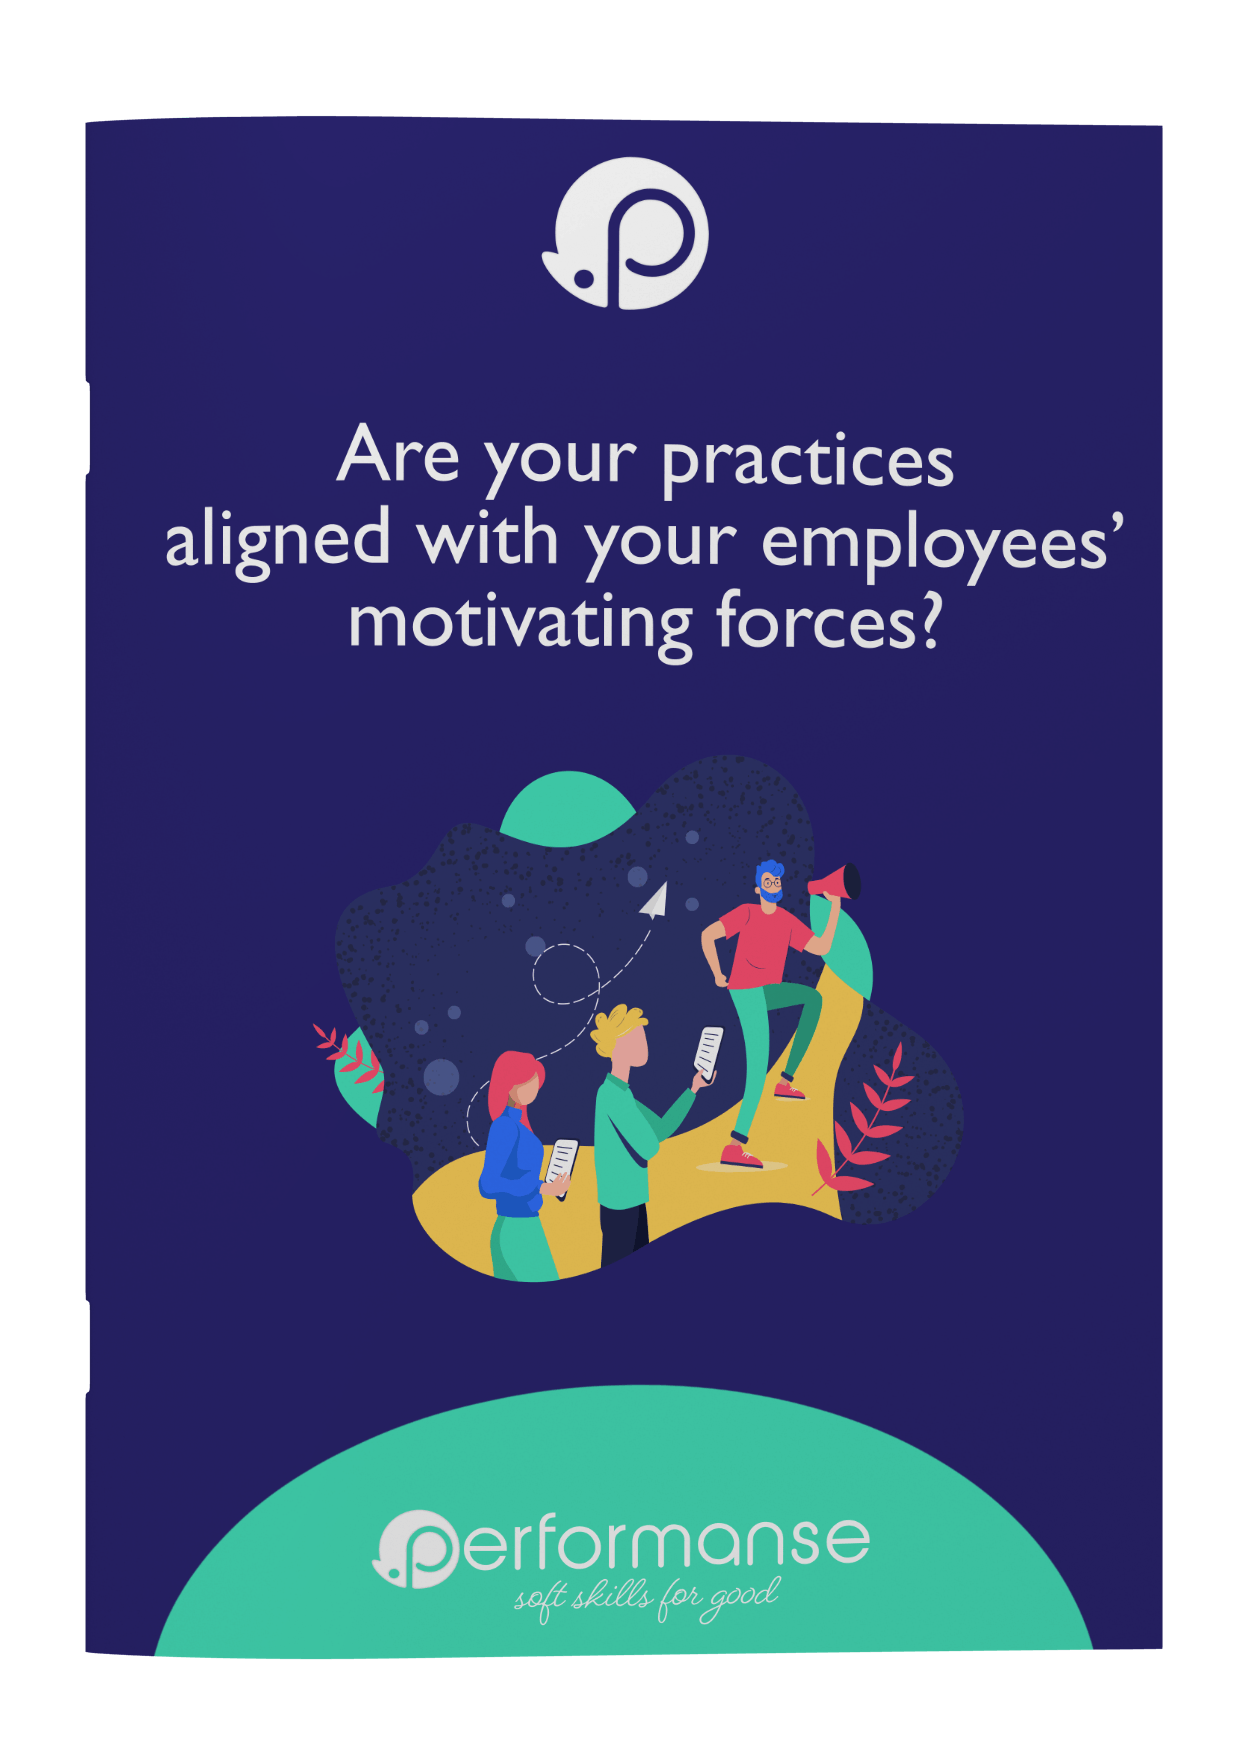 Companies :
Are your practices
aligned with your
employees’ motivating
forces?